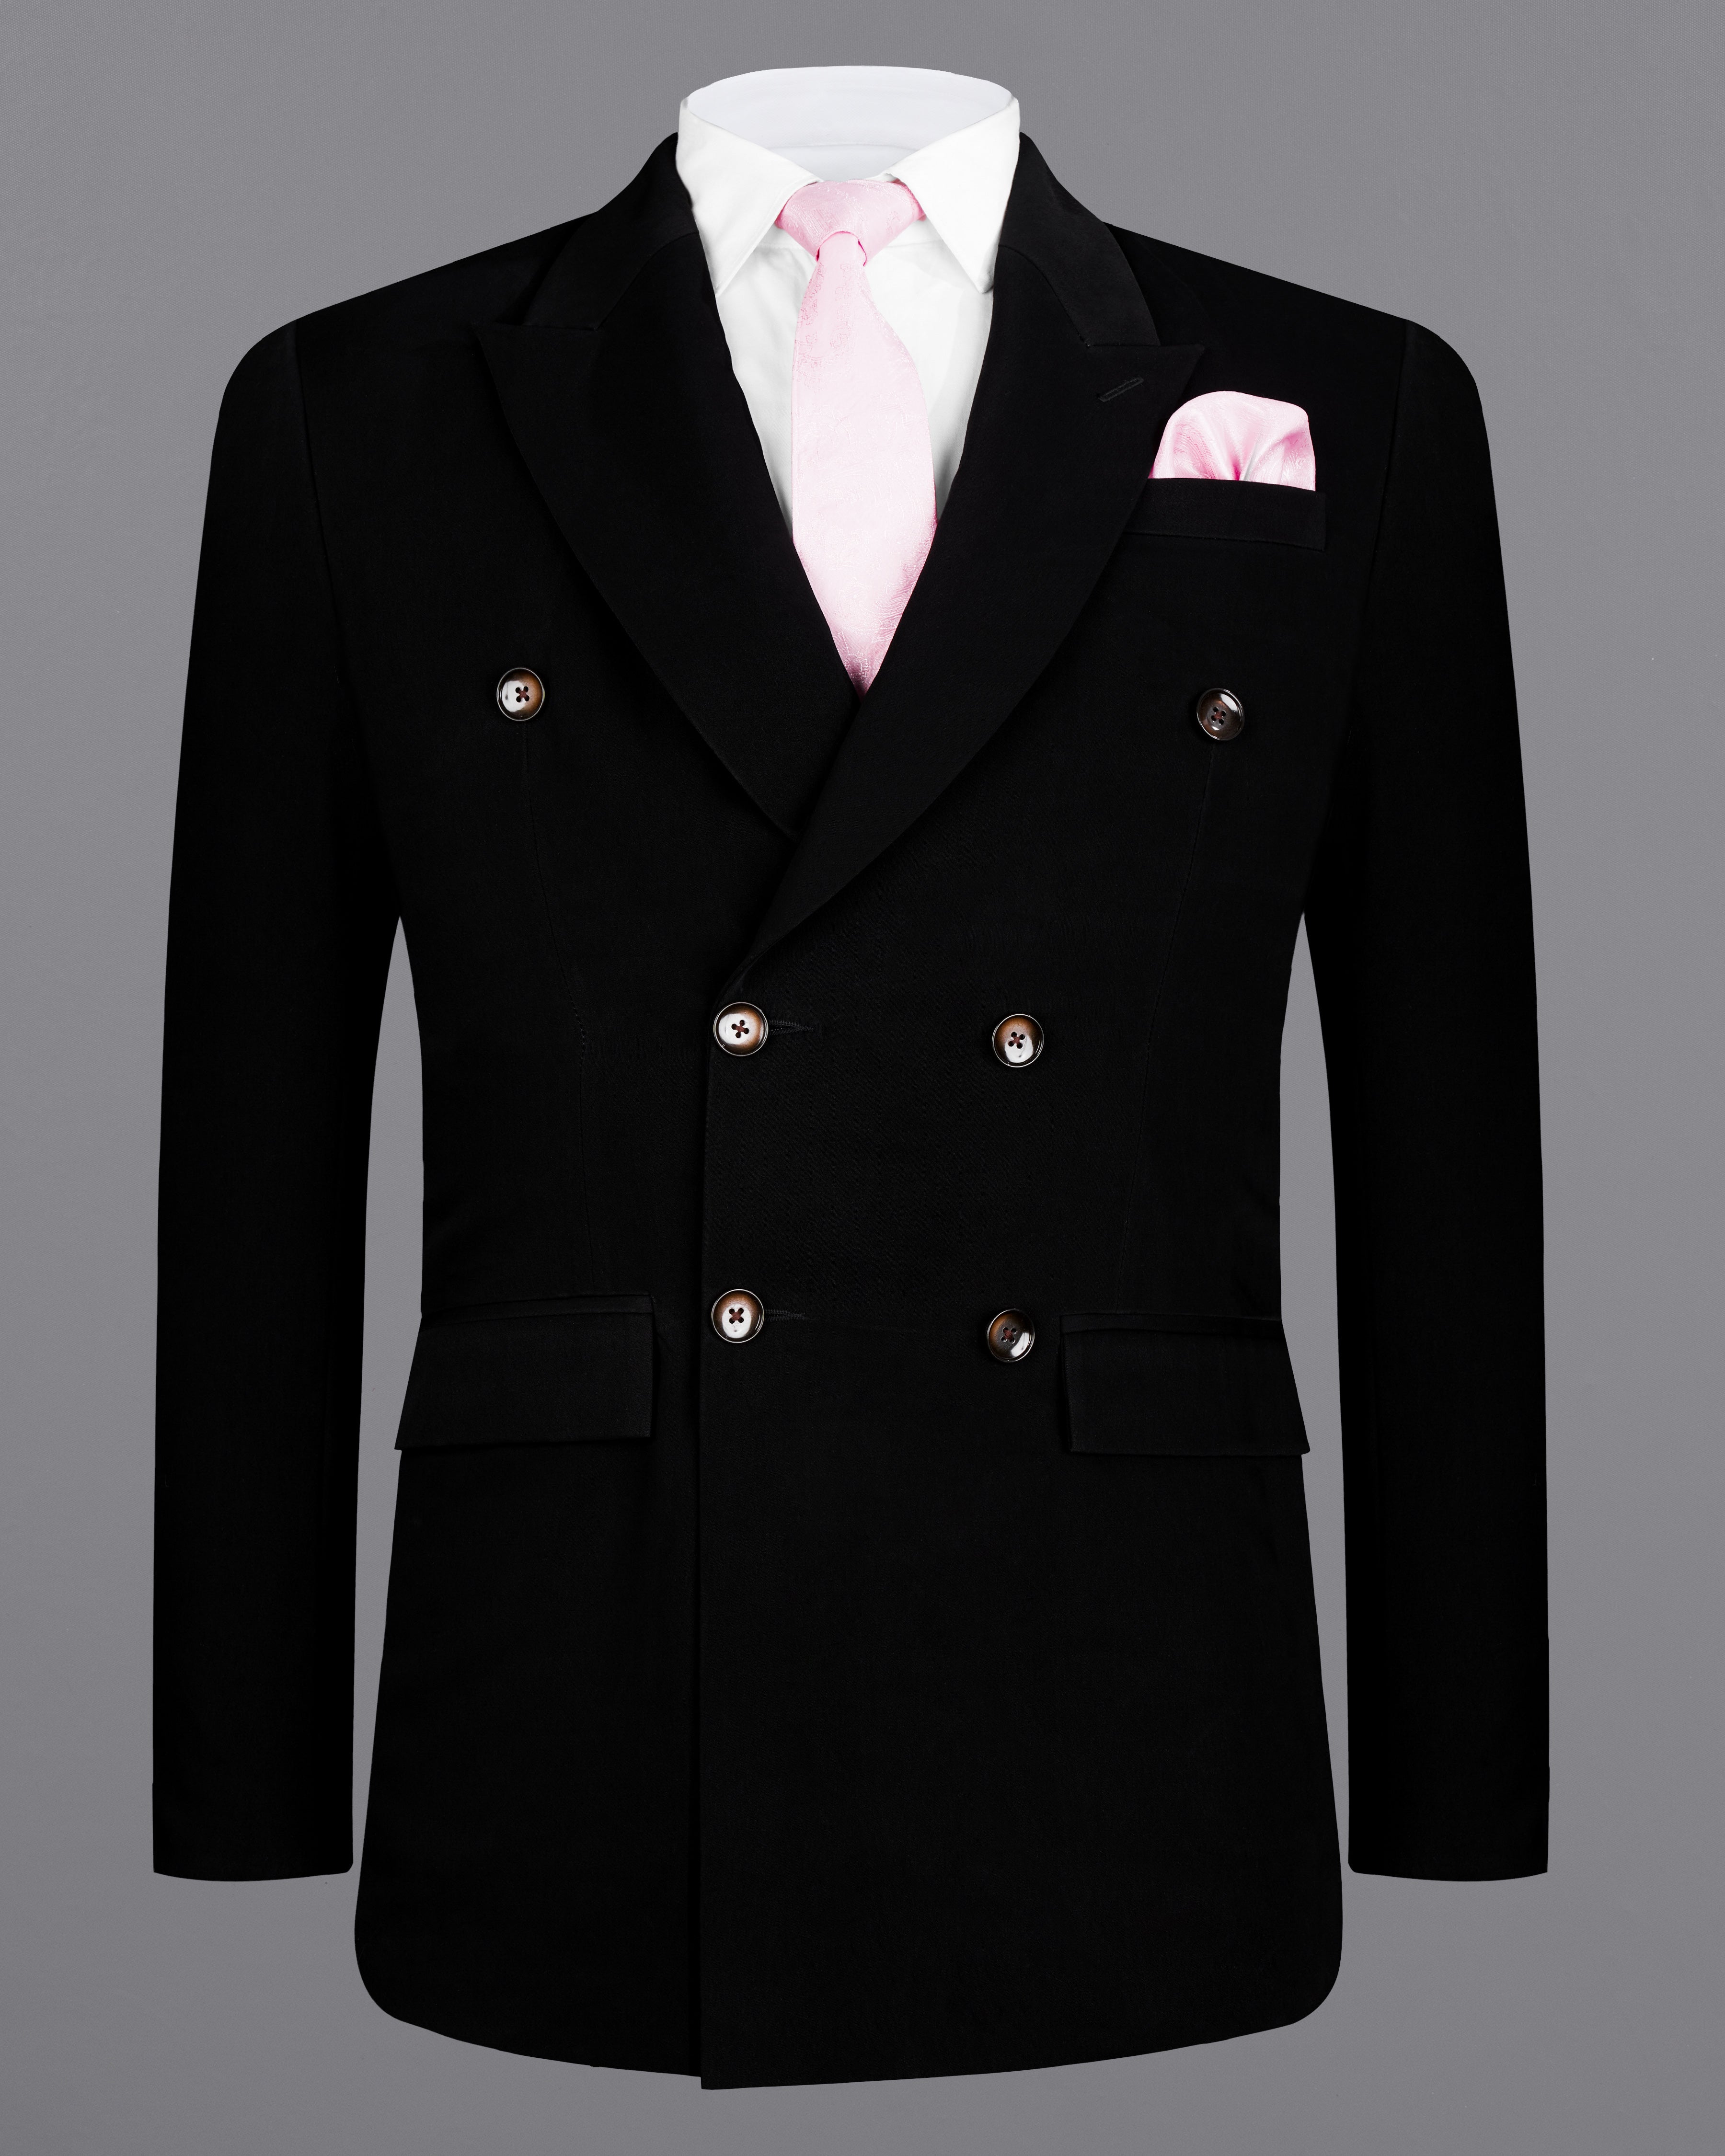 Ladies' Must-Have Elegance Wear Stylish Pea Coat with Three-Breasted  Mid-Length Lapels Pocket at  Women's Clothing store